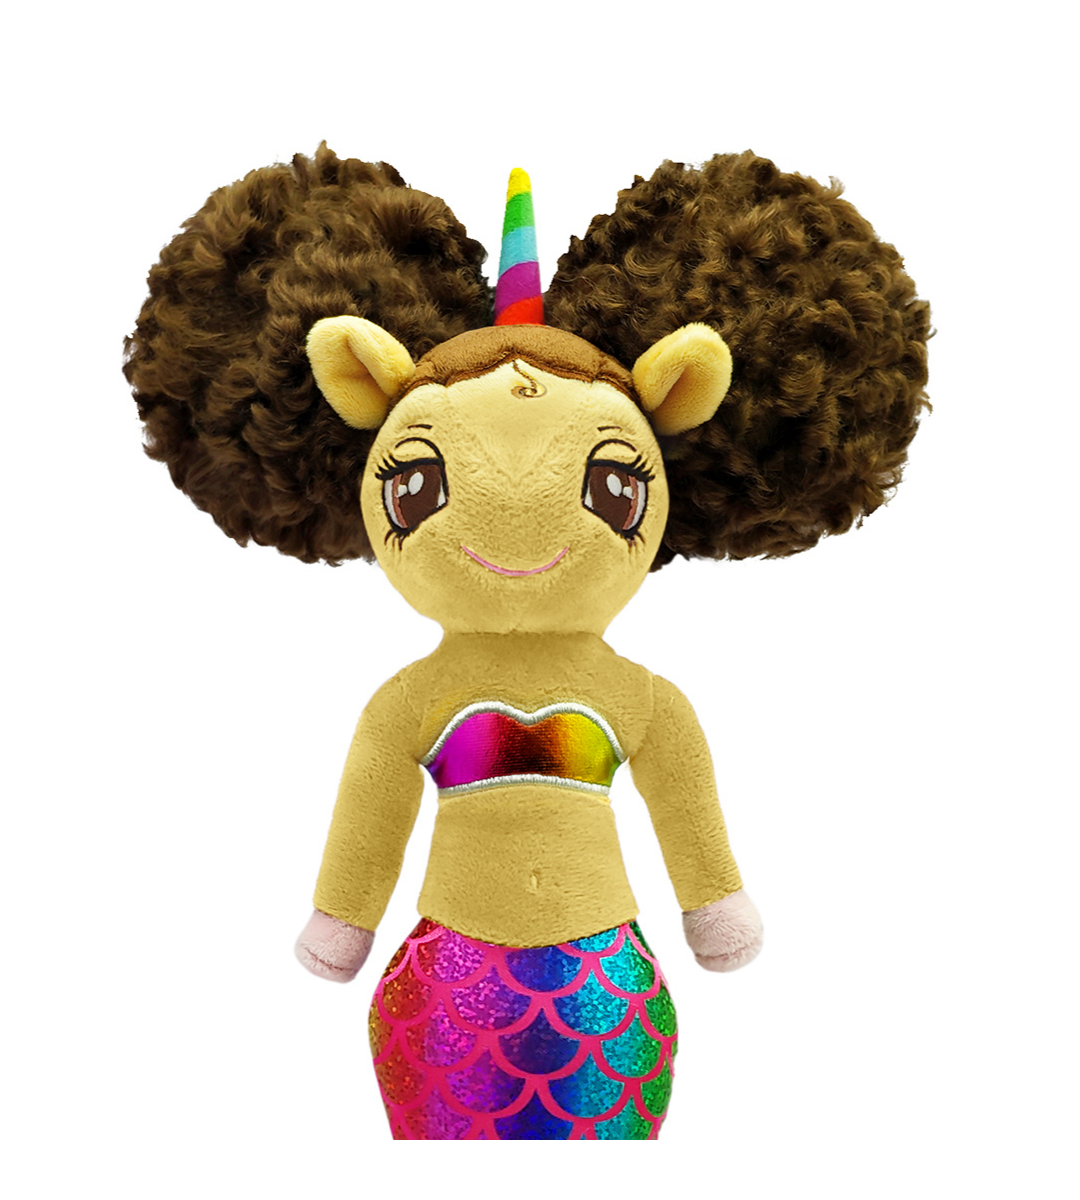 Zoë, Mermaid Unicorn Doll with Afro Puffs  - 16 inch